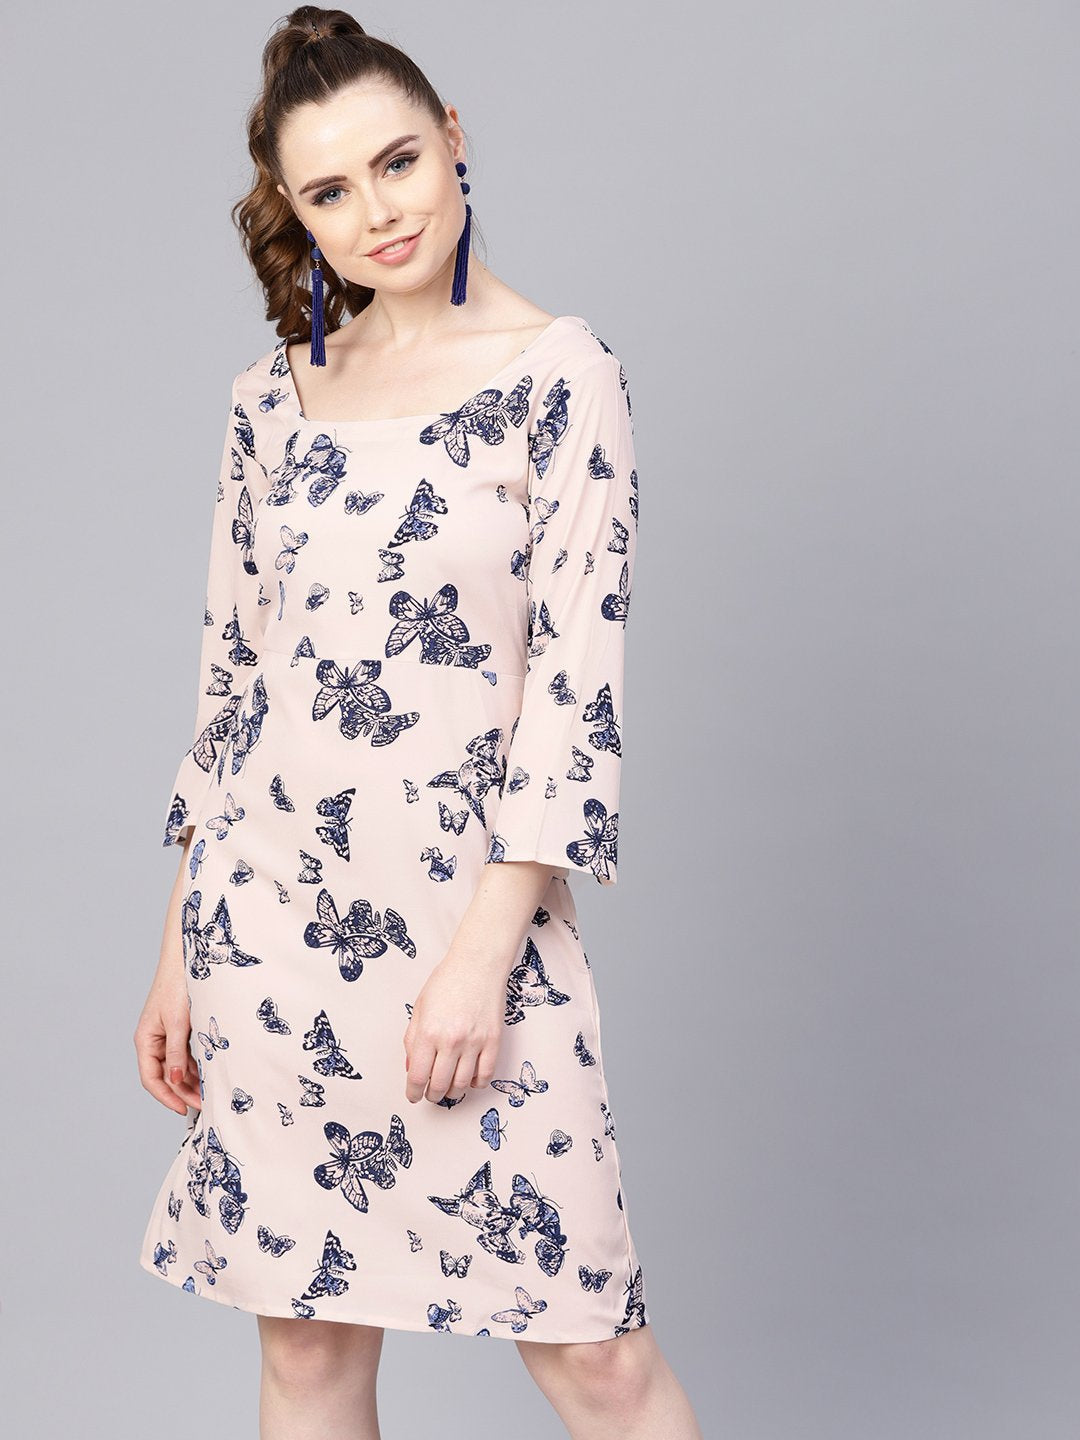 Women's White Butterfly Printed Dress With Square Neck - Nayo Clothing